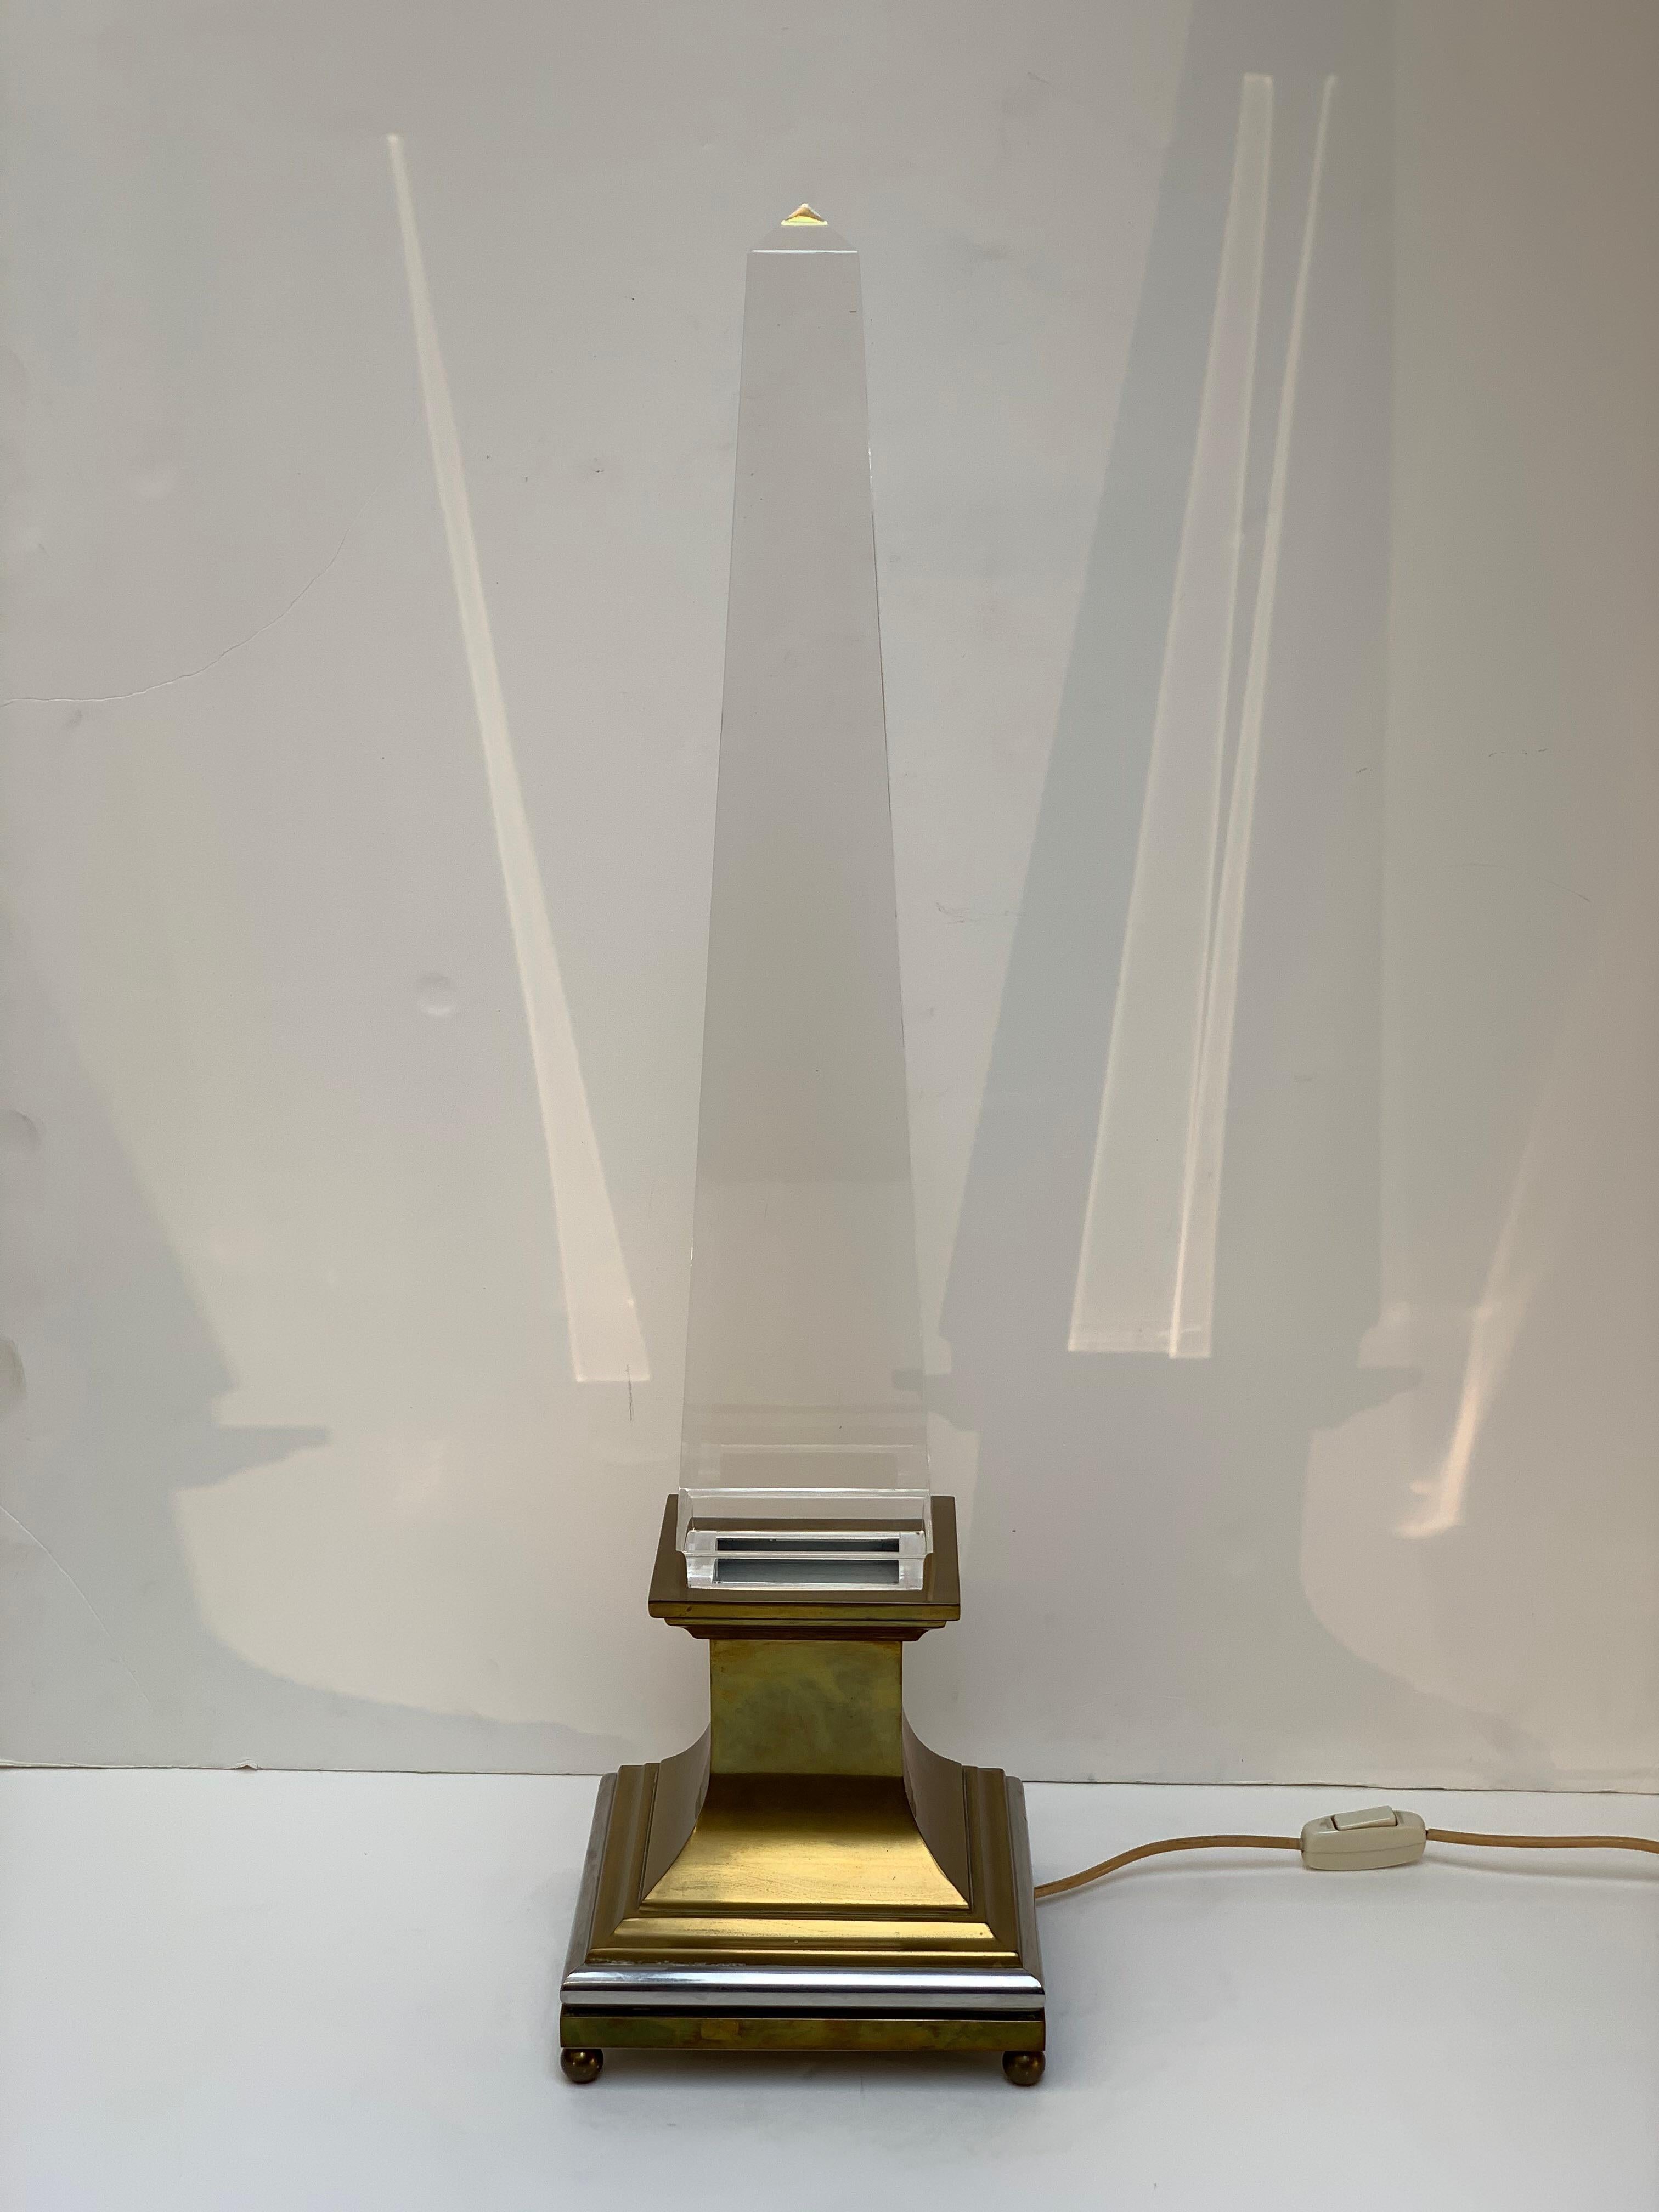 Lamp designed by Italian Architect Sandro Petti for Maison Jansen Paris France with brass base with silver details and large plexiglass obelisk, inside the base two neon lights to illuminate the Lucite obelisk.
Paris France midcentury 1970s.
 